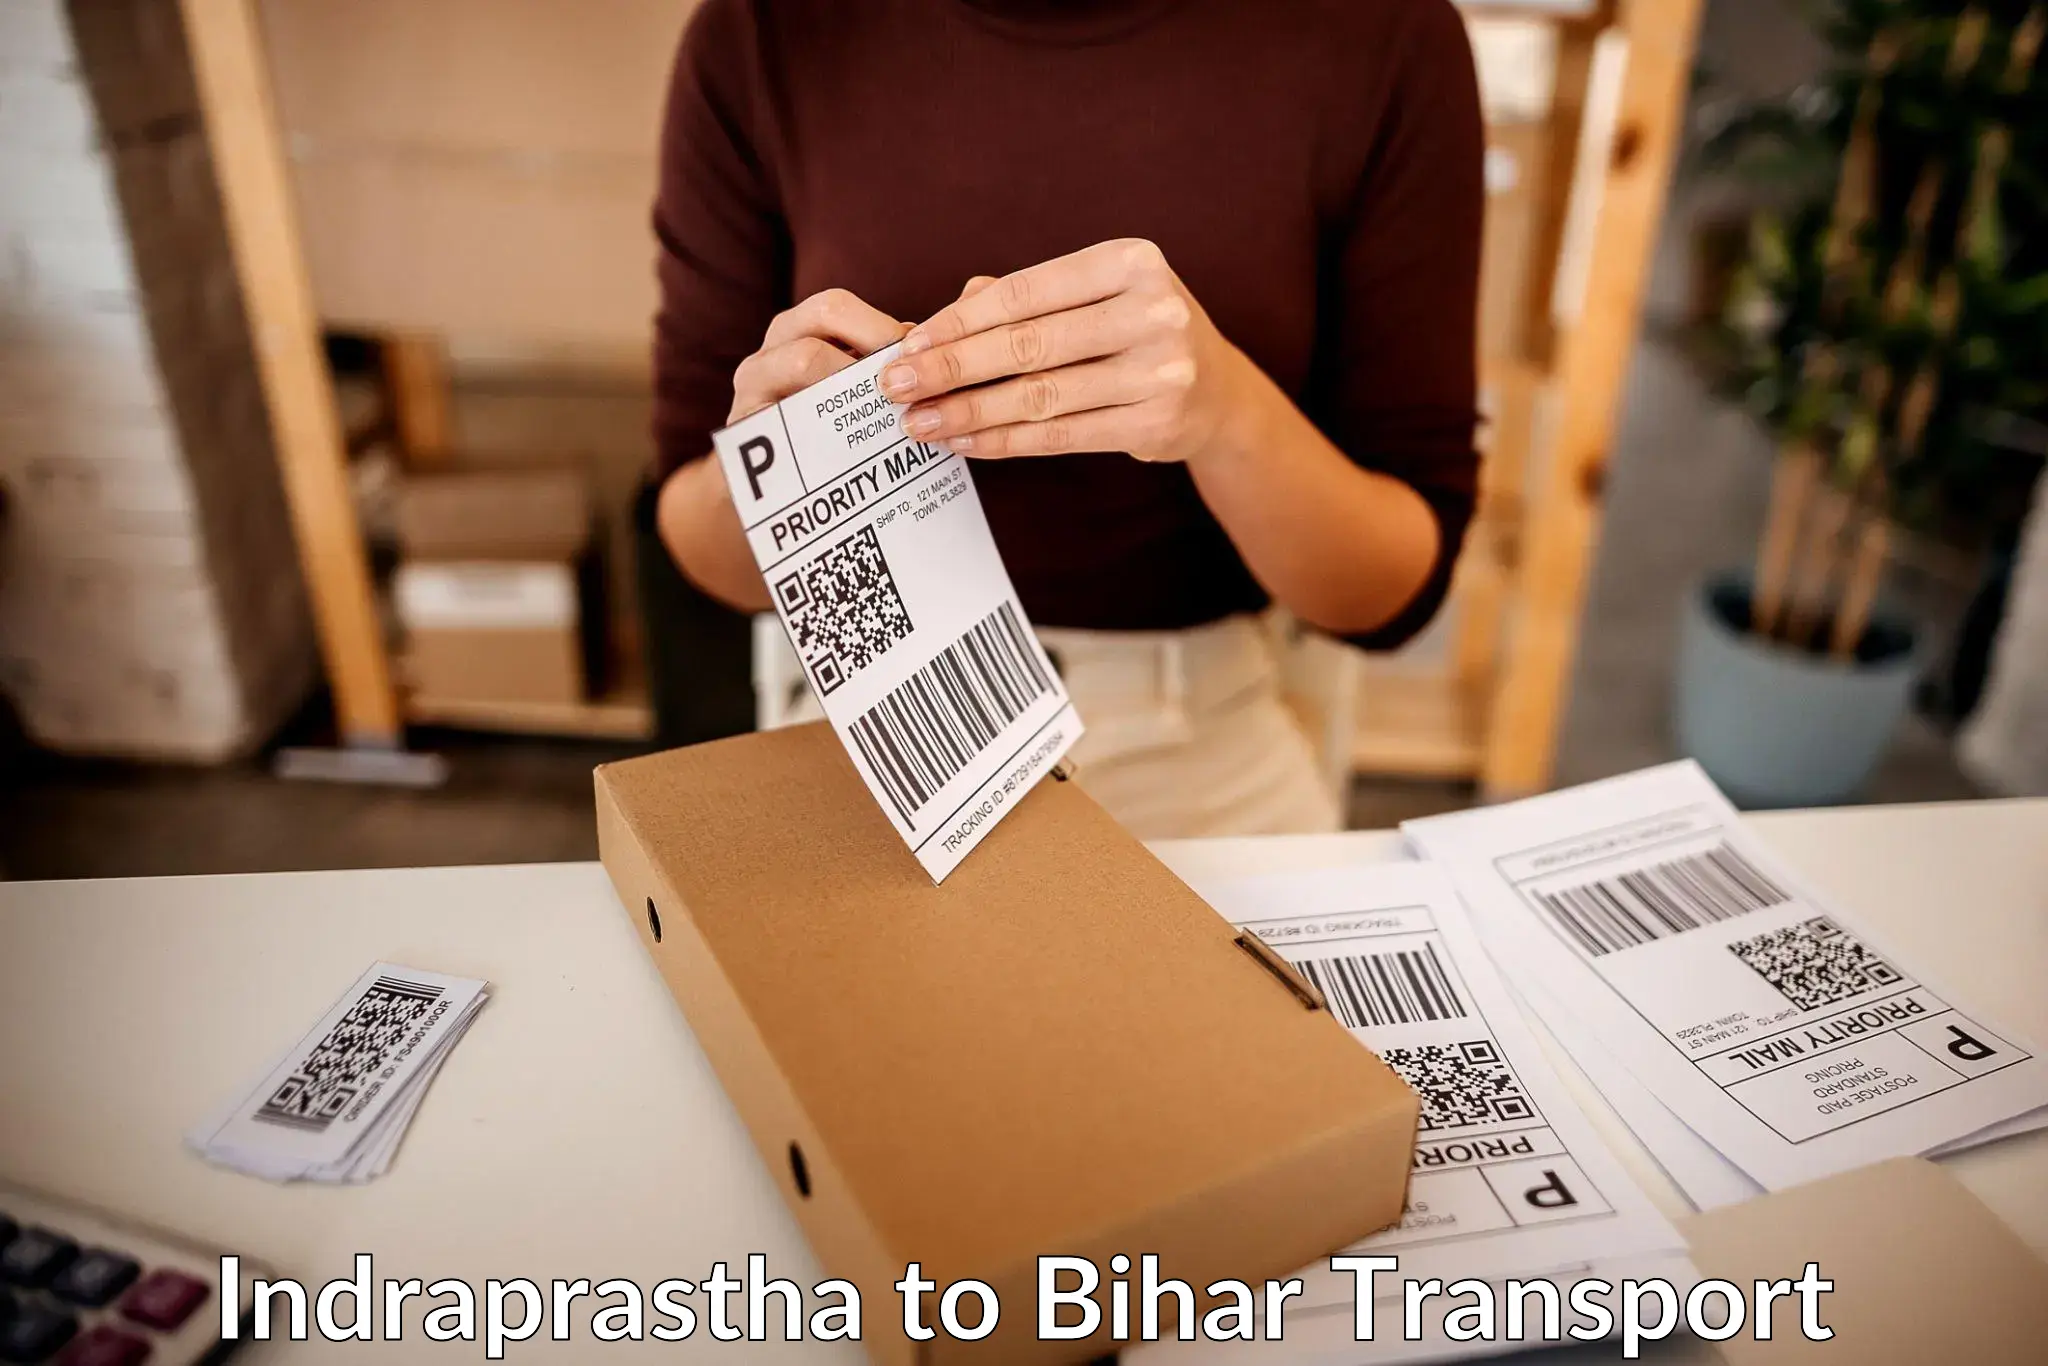 Shipping services Indraprastha to Sandesh